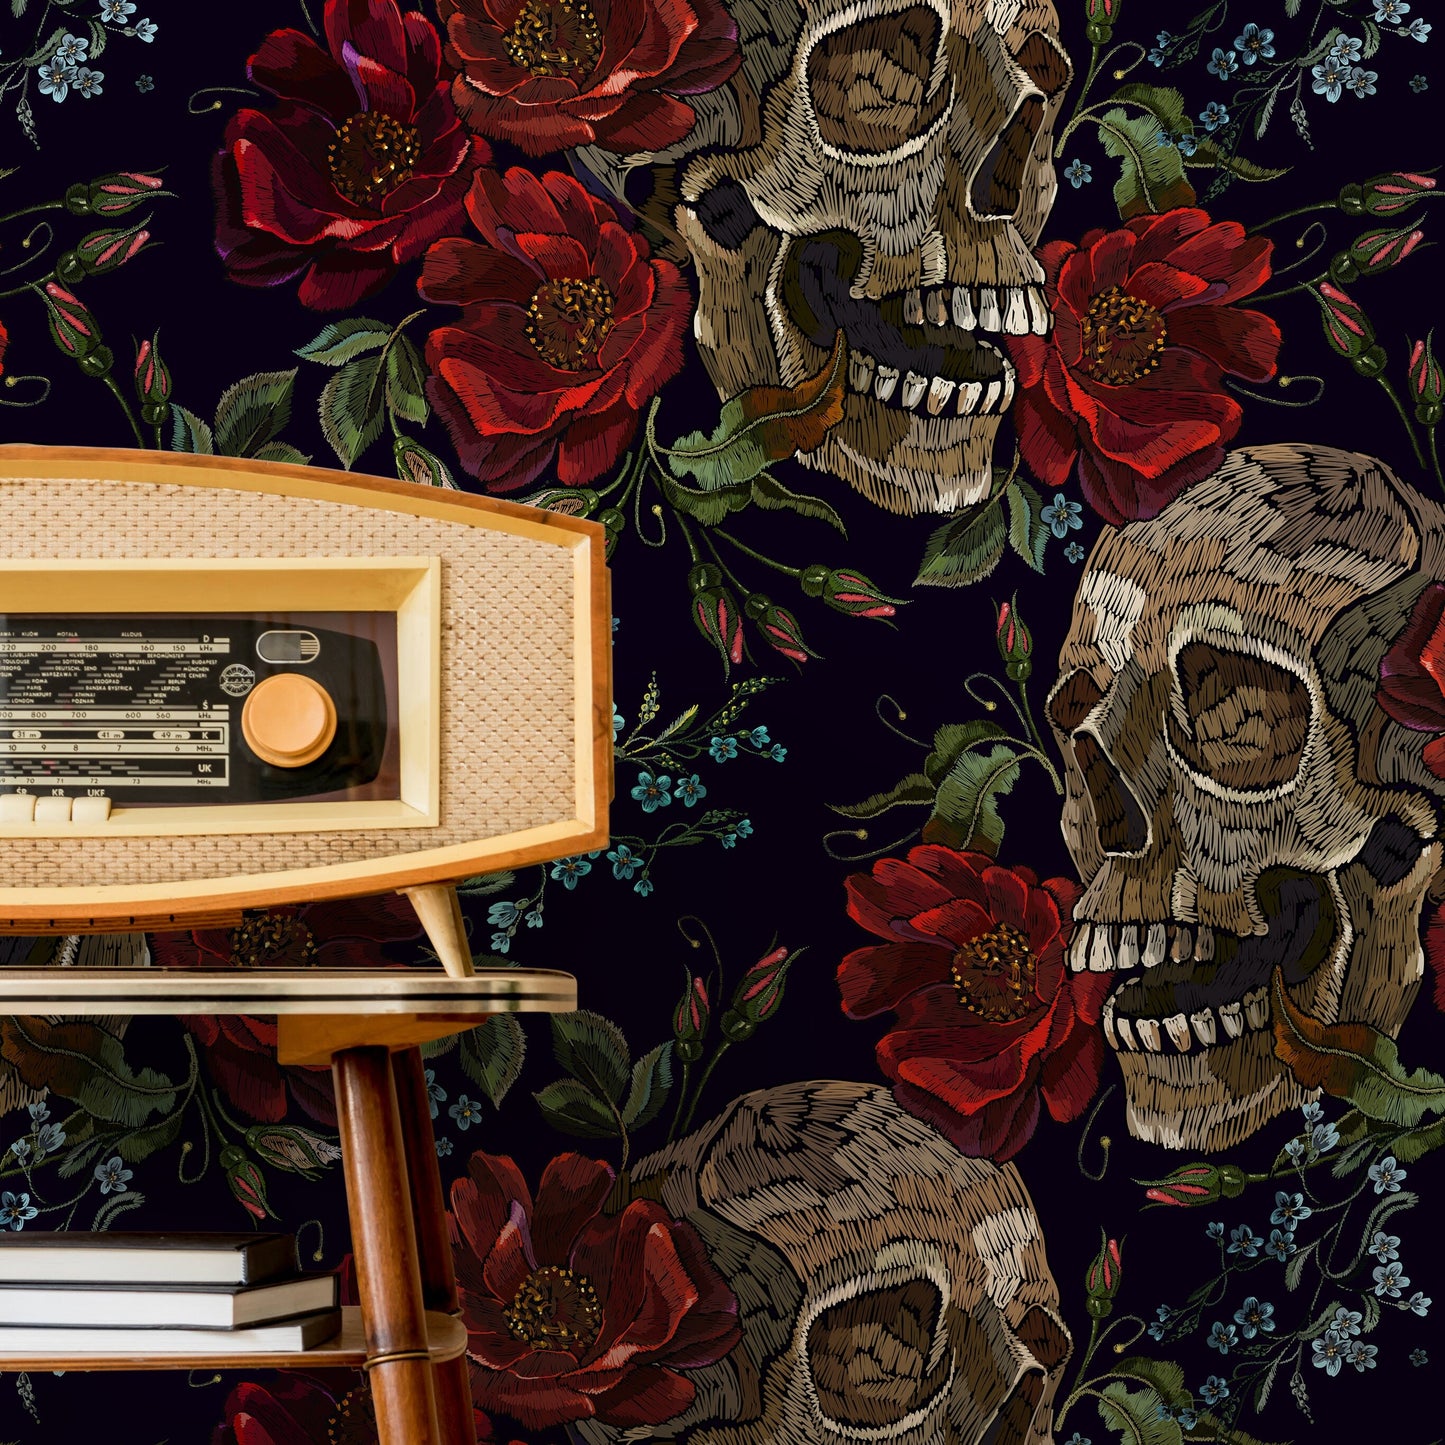 Dark Roses Wallpaper Gothic Skull Wallpaper Peel and Stick and Traditional Wallpaper - D893